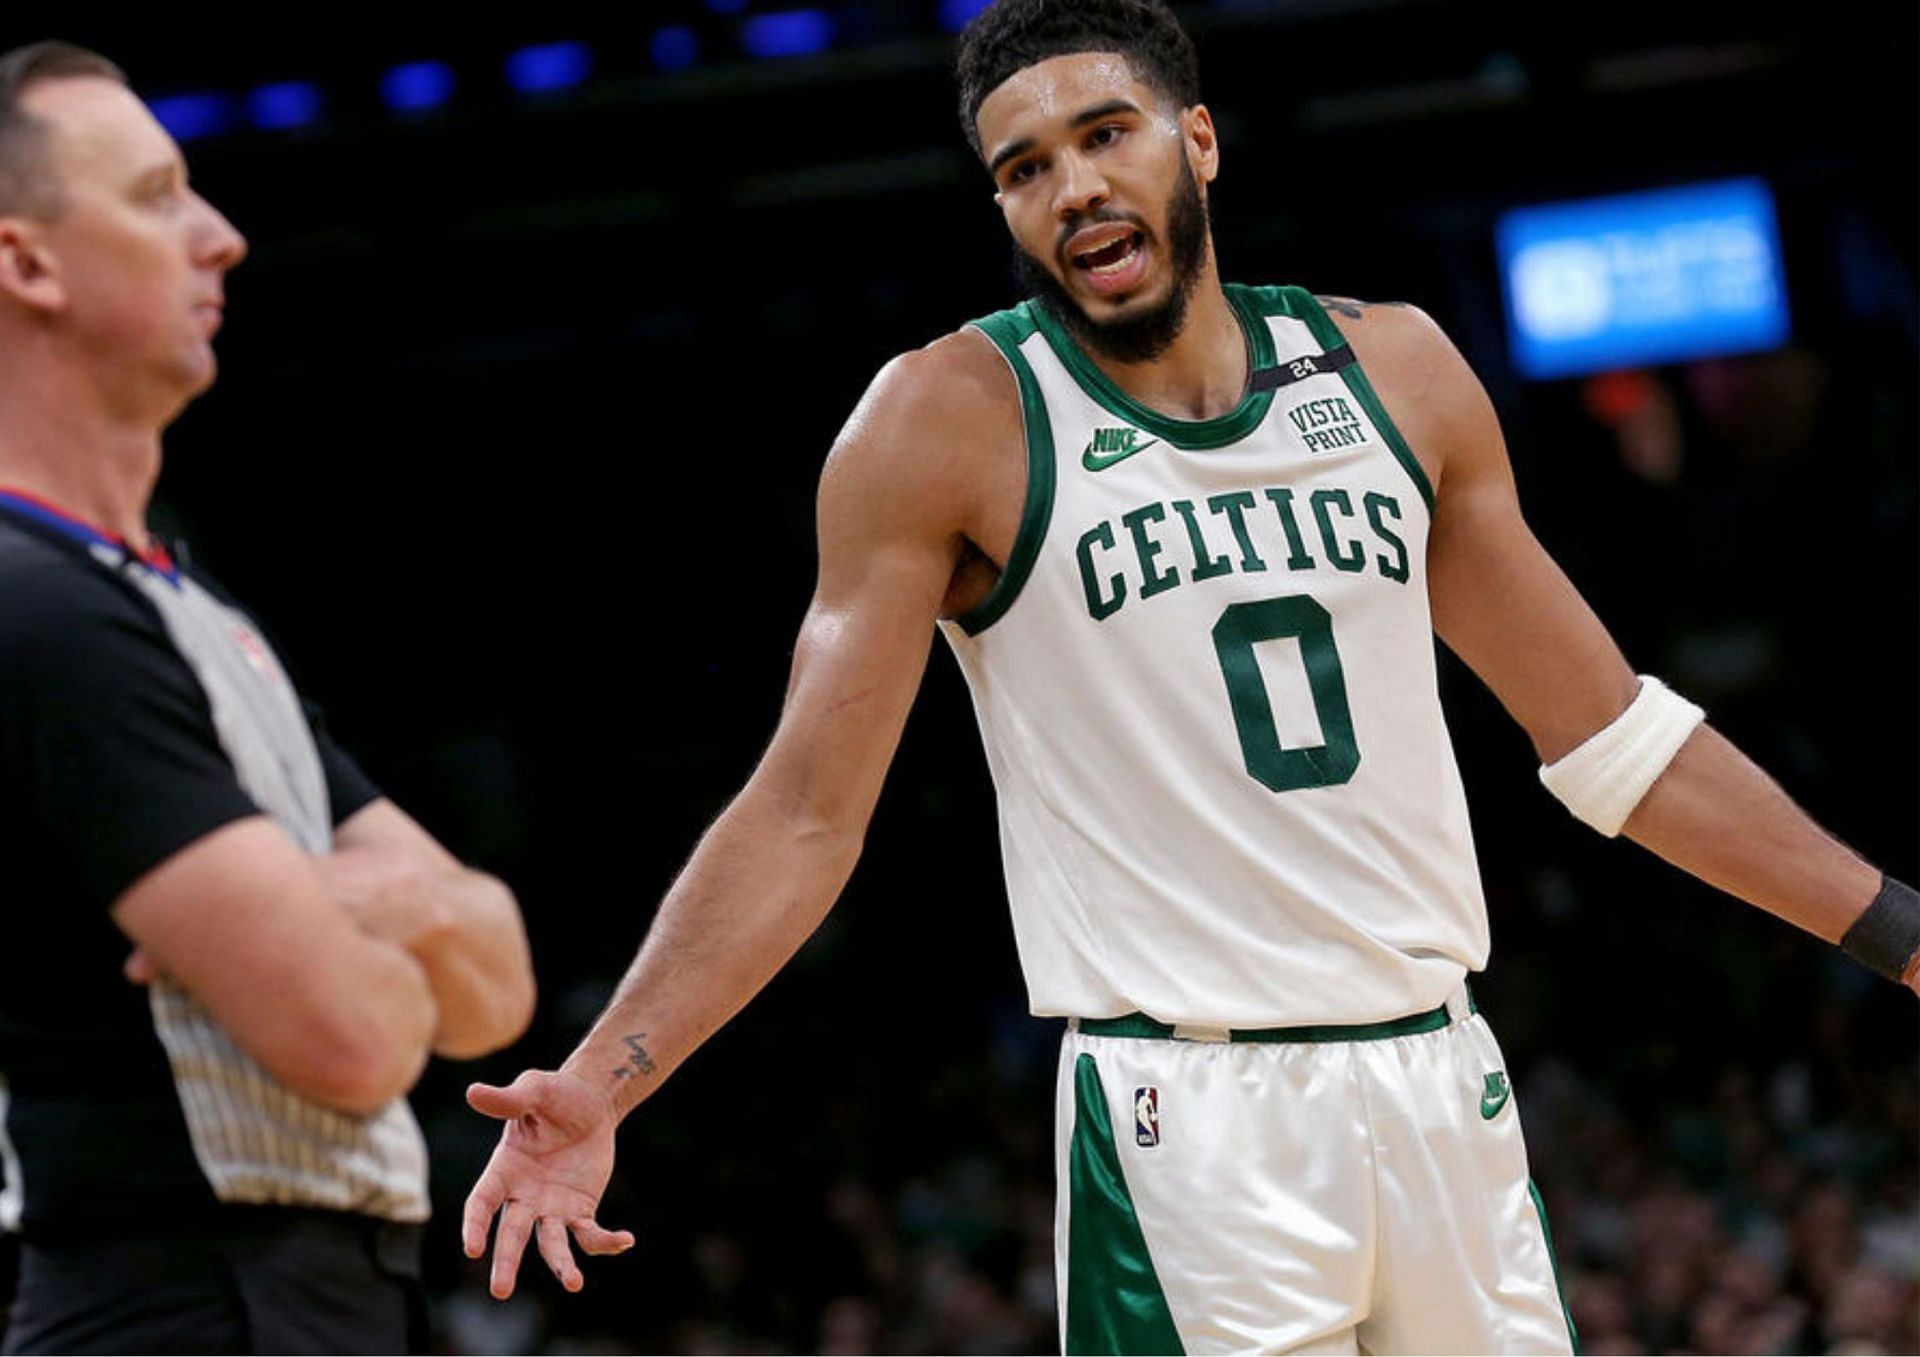 Jayson Tatum was called for an early technical foul following a no-call on his dunk in the first quarter against the Miami Heat.